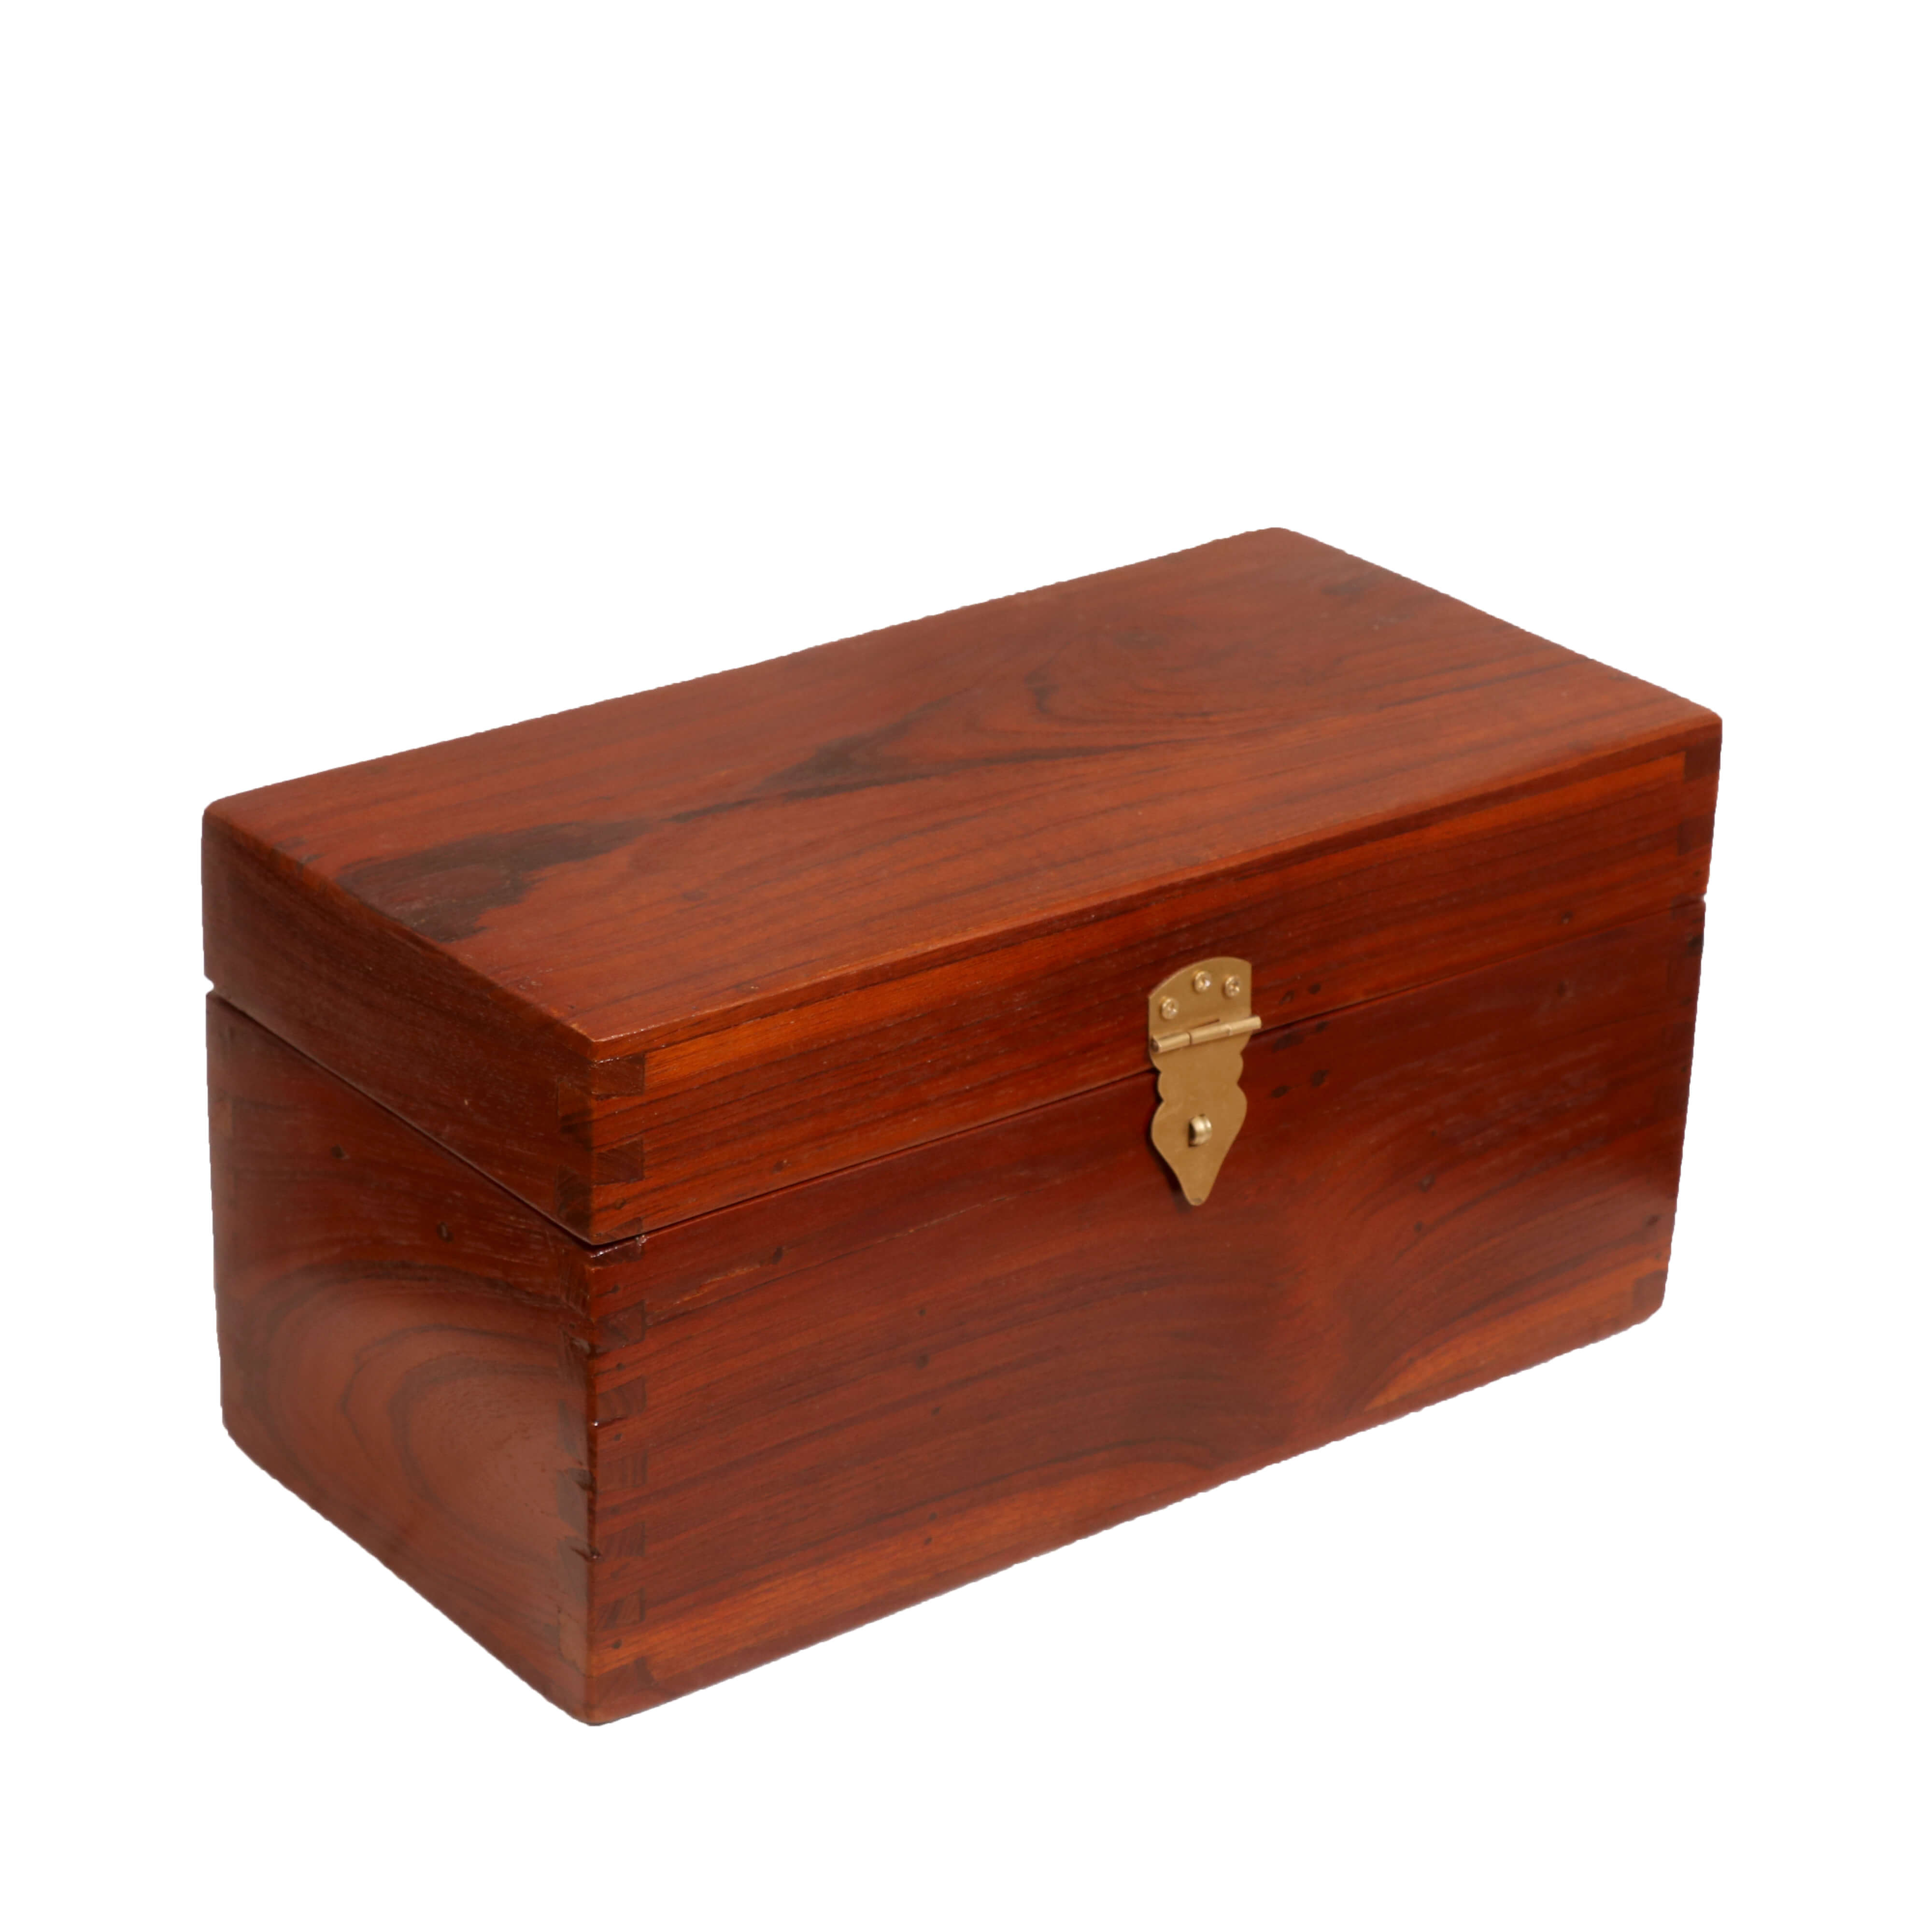 3-Compartment Wooden Box Wooden Box